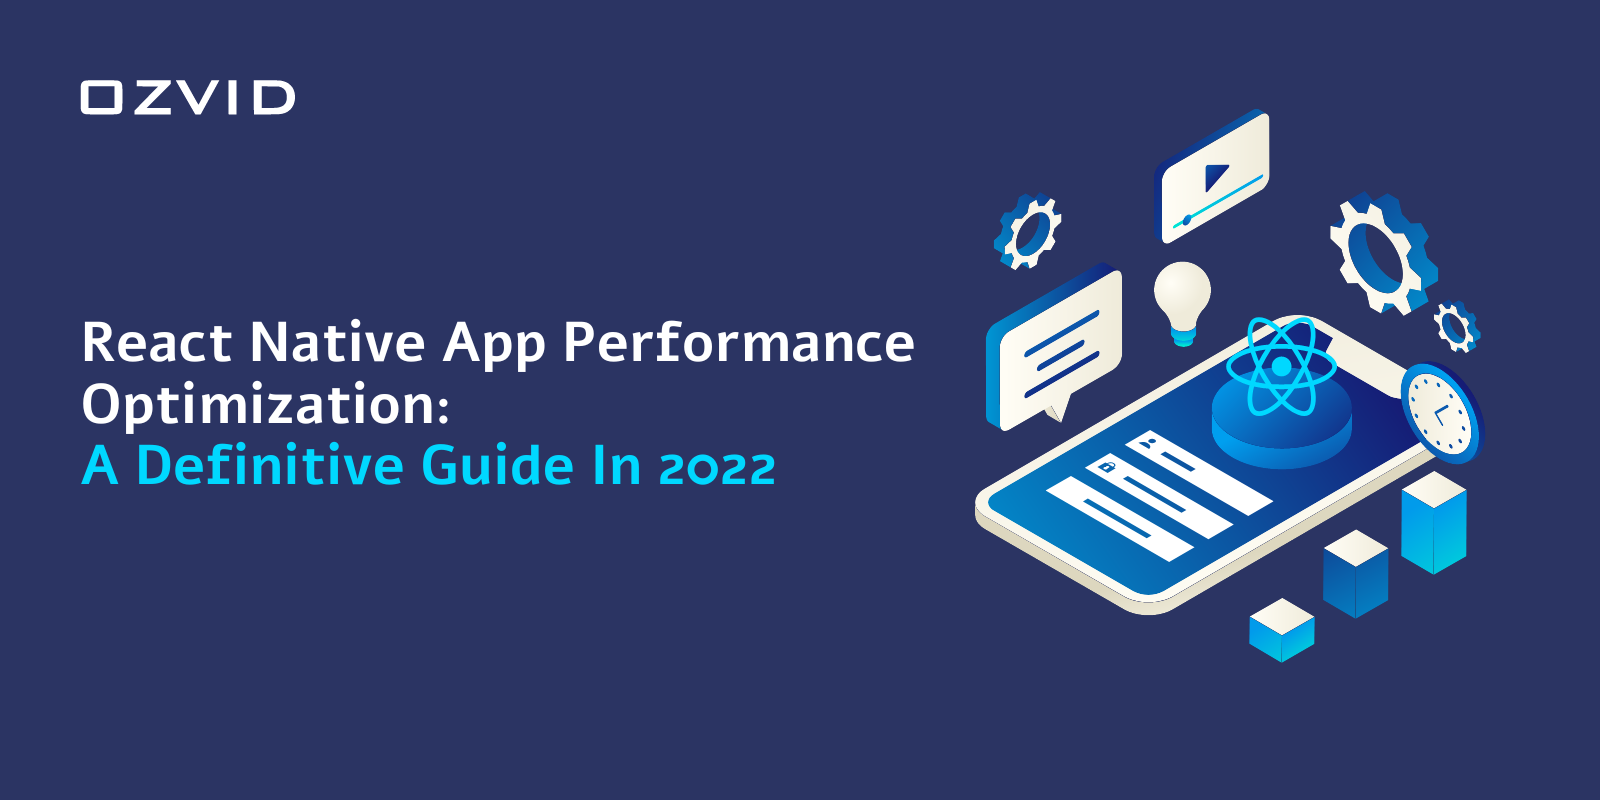 React Native App Performance Optimization: A Definitive Guide In 2022